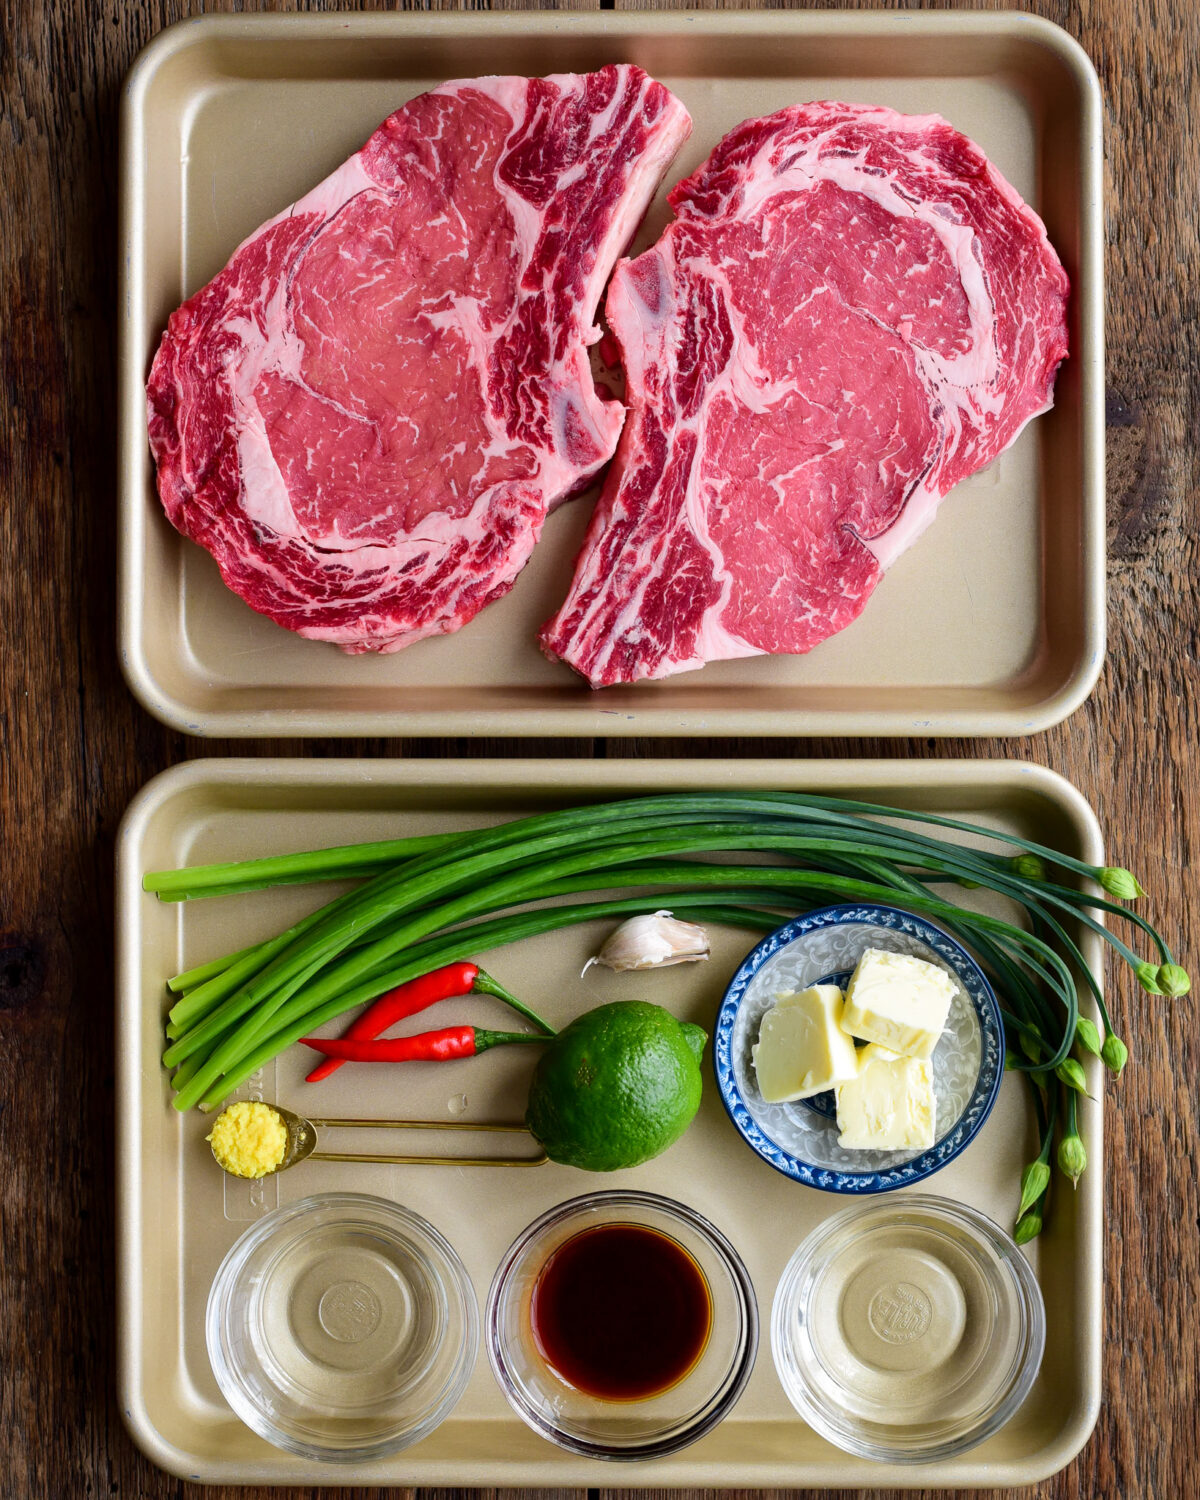 Ingredients laid out for a grilled rib eye steak recipe.